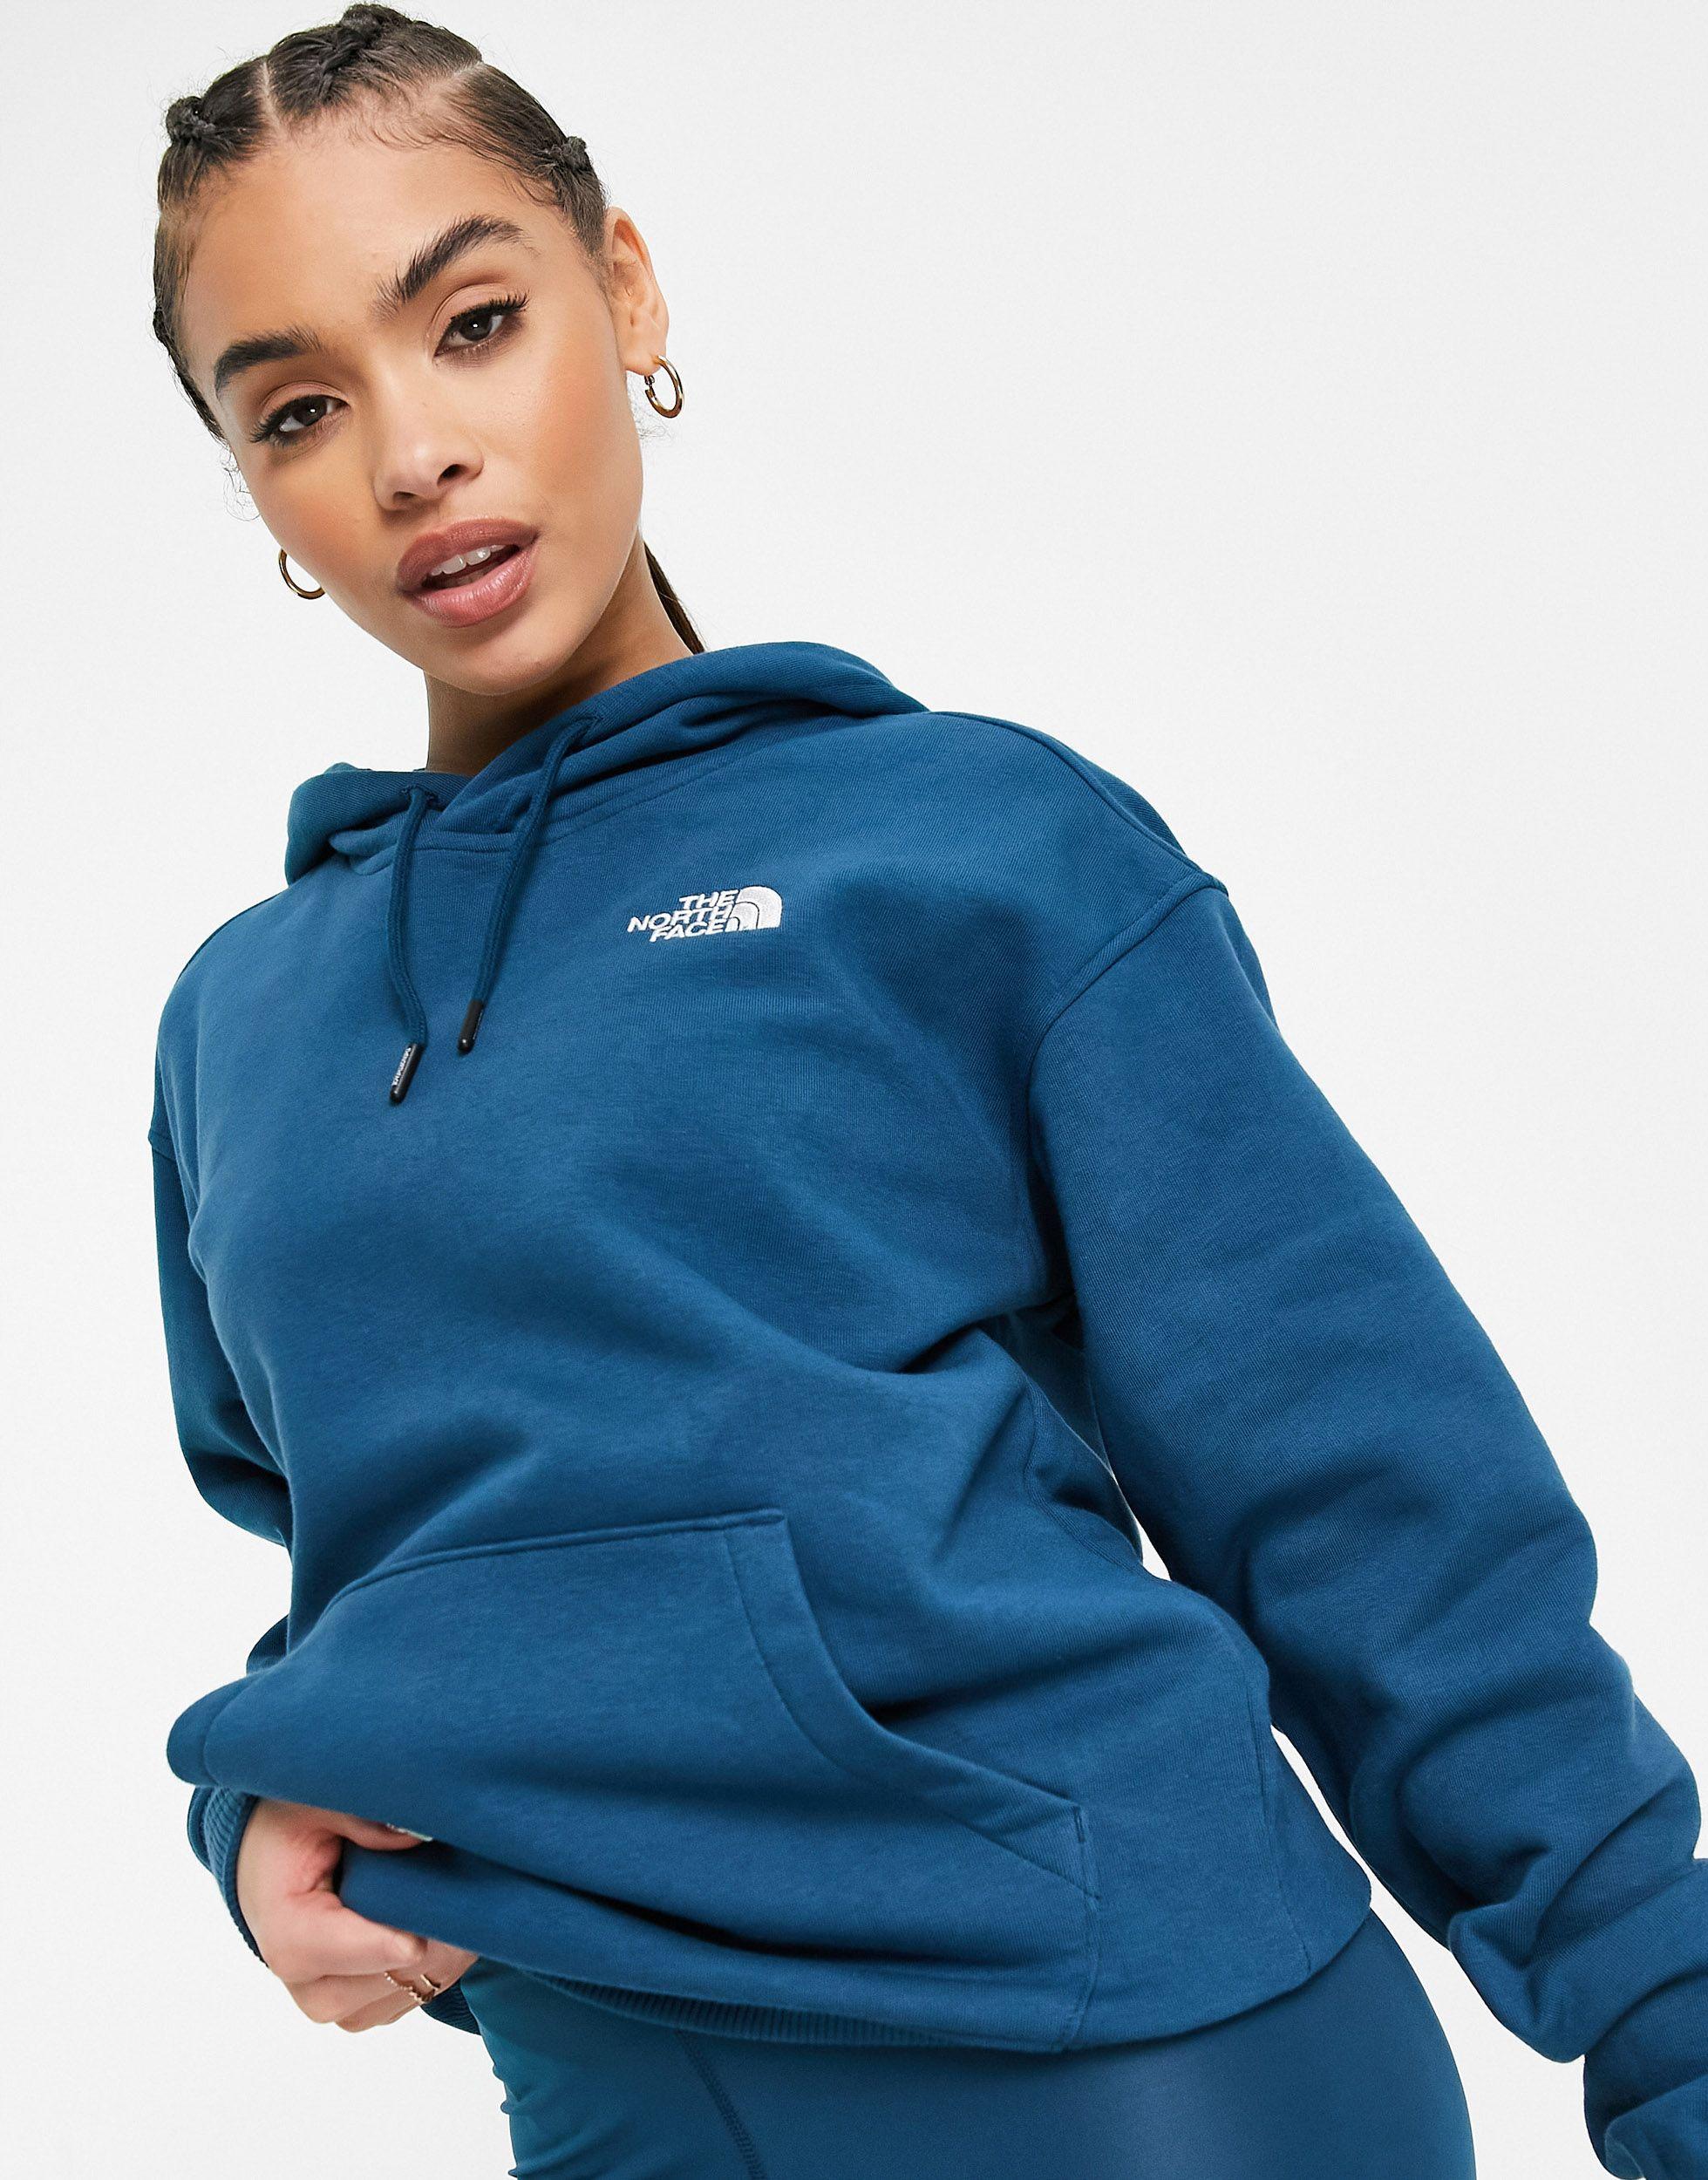 The North Face Cotton Essential Hoodie in Navy (Blue) - Save 35 